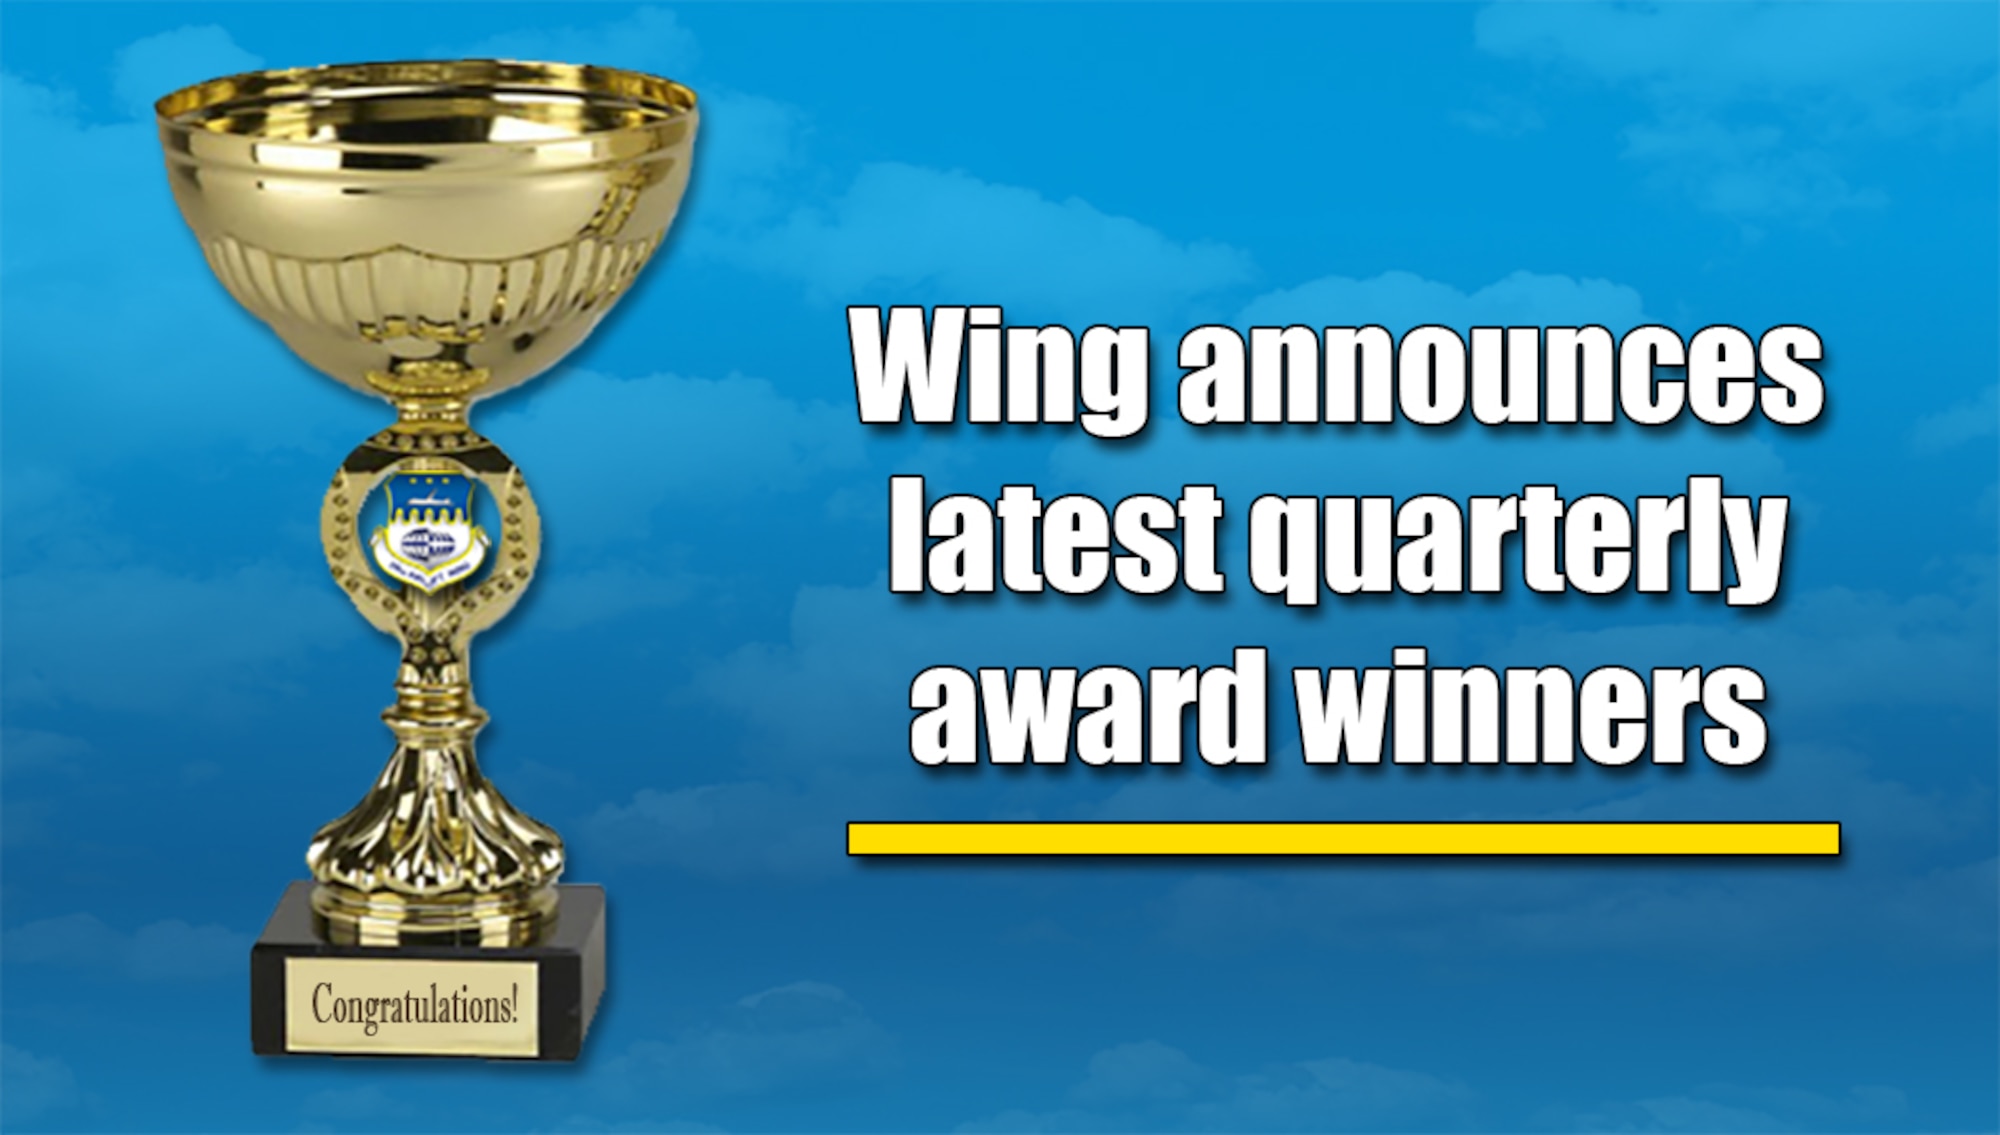 The 315th Airlift Wing announced its latest quarterly award winners this week. (U.S. Air Force graphic by Michael Dukes)